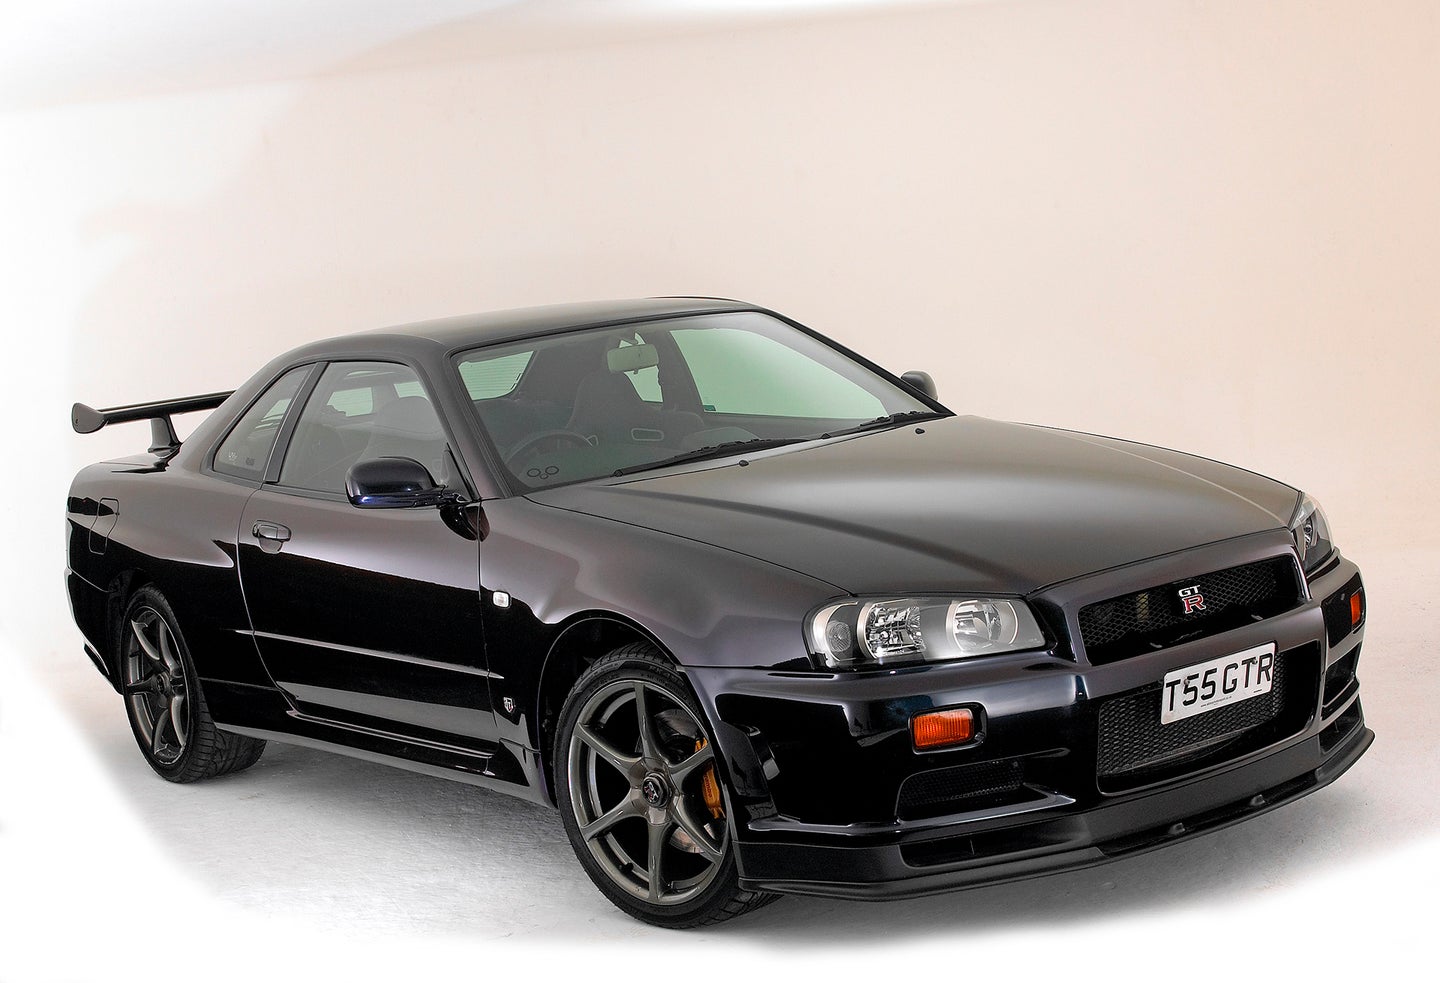 Nissan’s Heritage Parts Program to Begin Producing R33 and R34 GT-R Parts Once Again